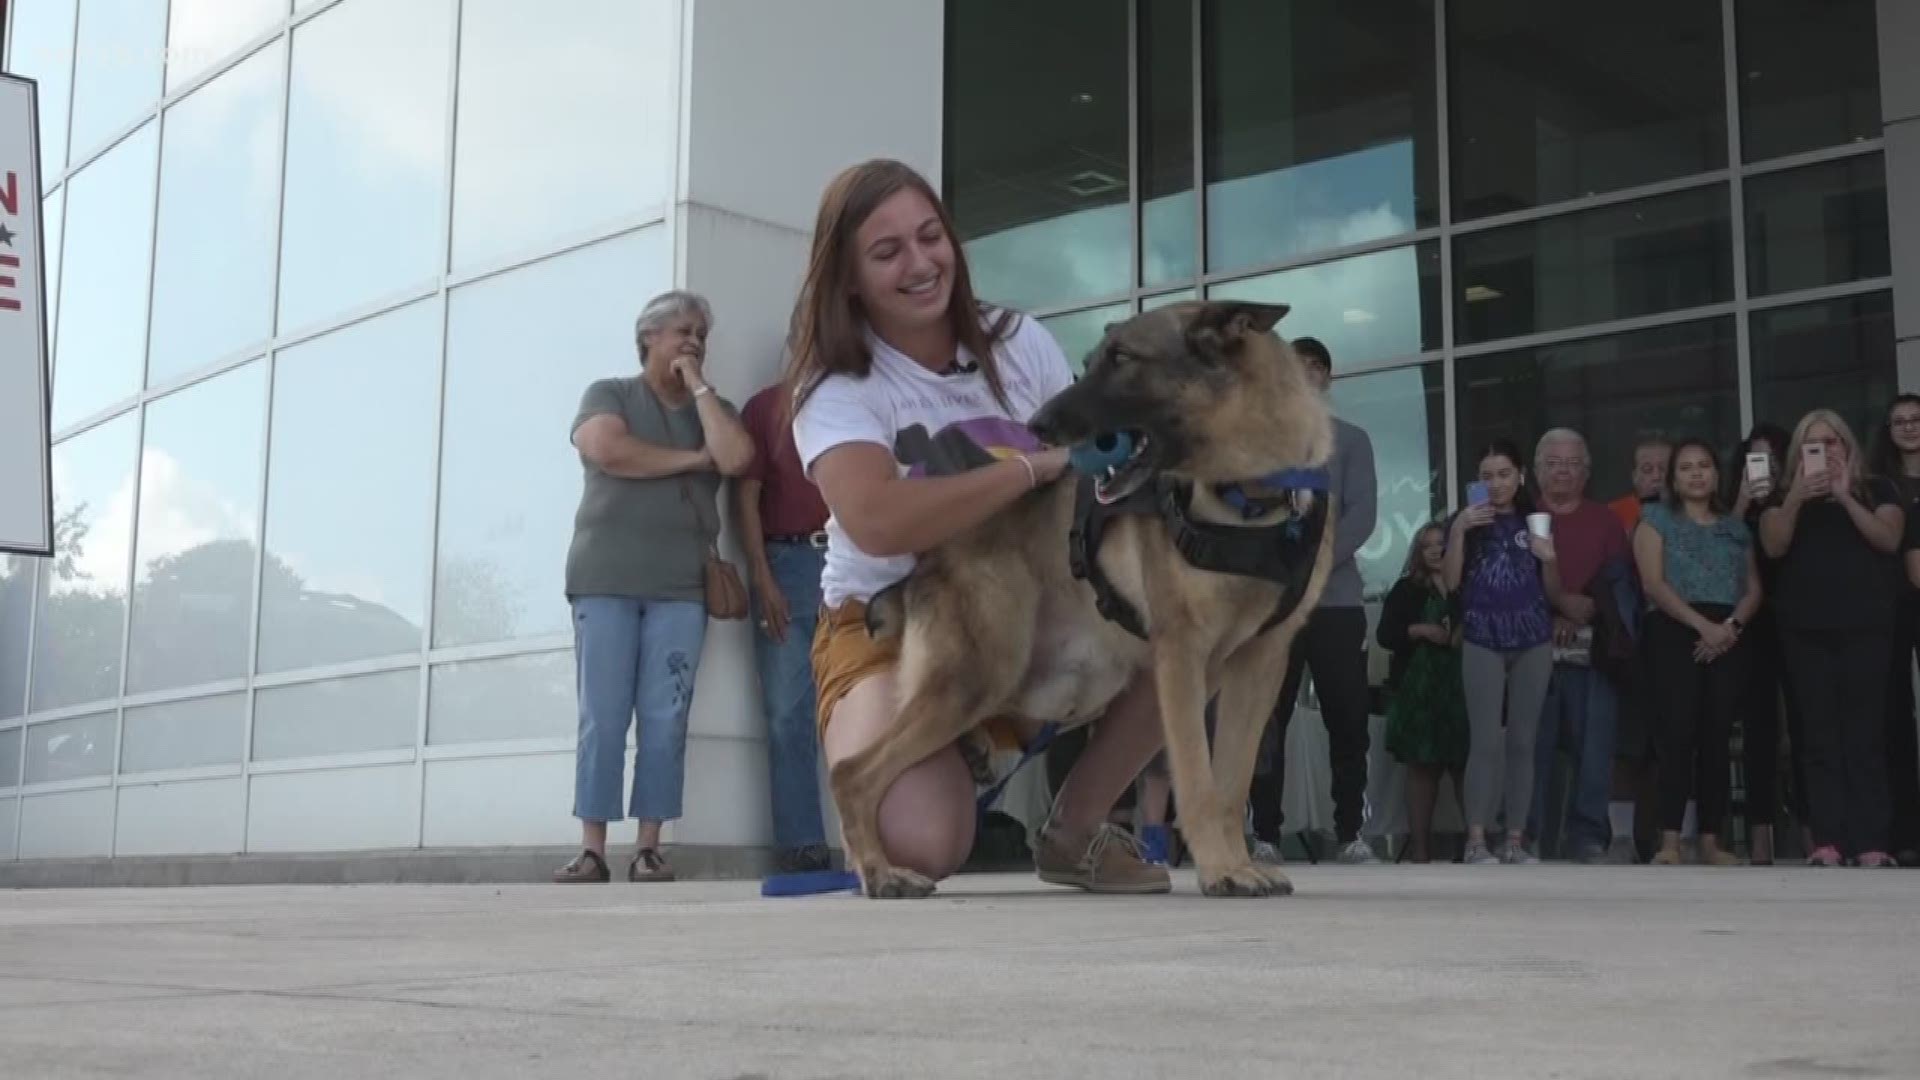 A military working dog traveled from Japan to San Antonio to reunite with his former handler who will adopt him. American Humane helped bring the two back together.